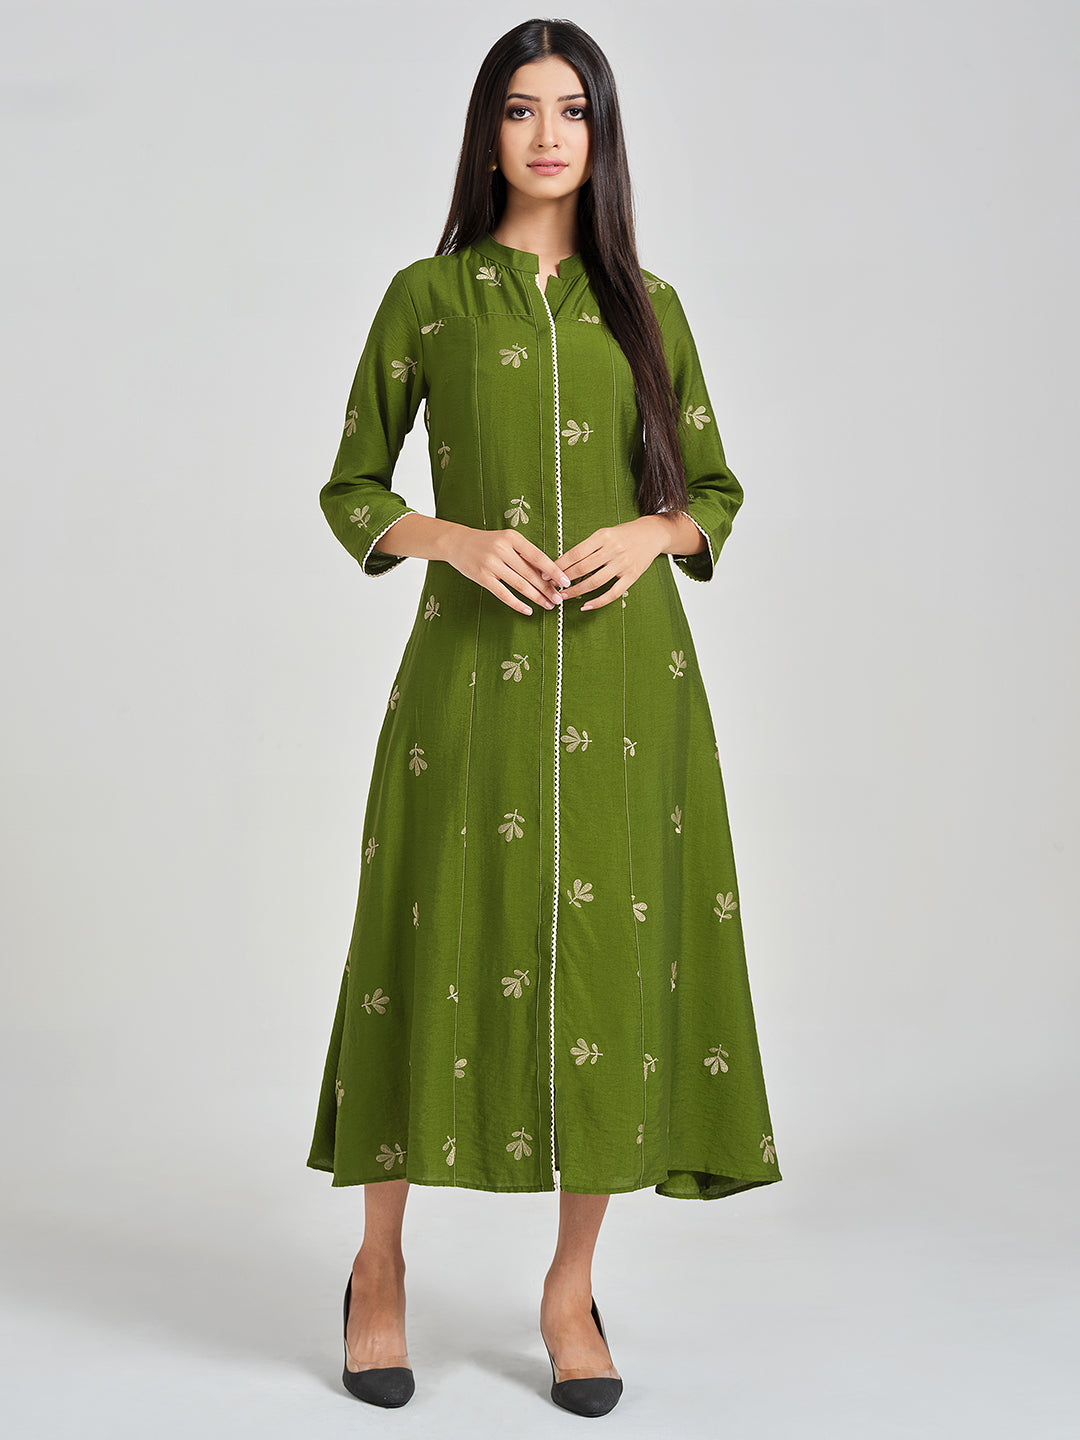 Green Embroidered A-Line Dress - ARH1264